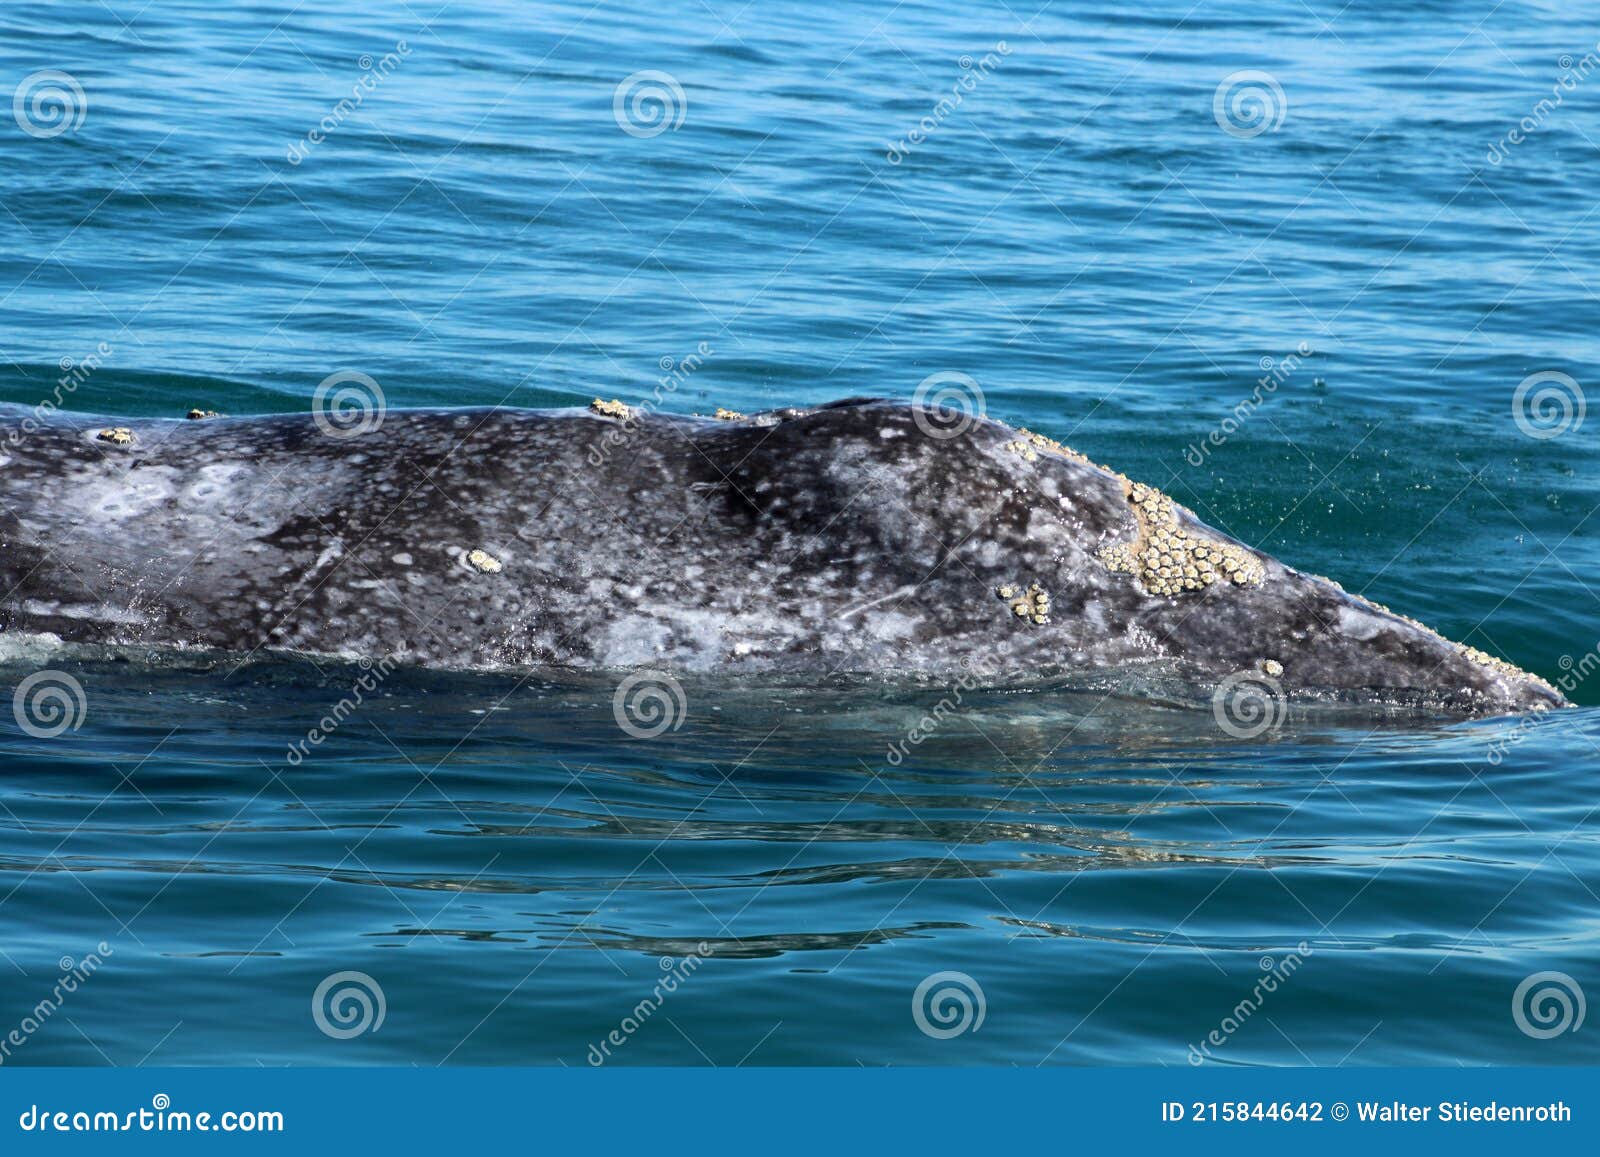 gray whale watching in mexico, baja california sur